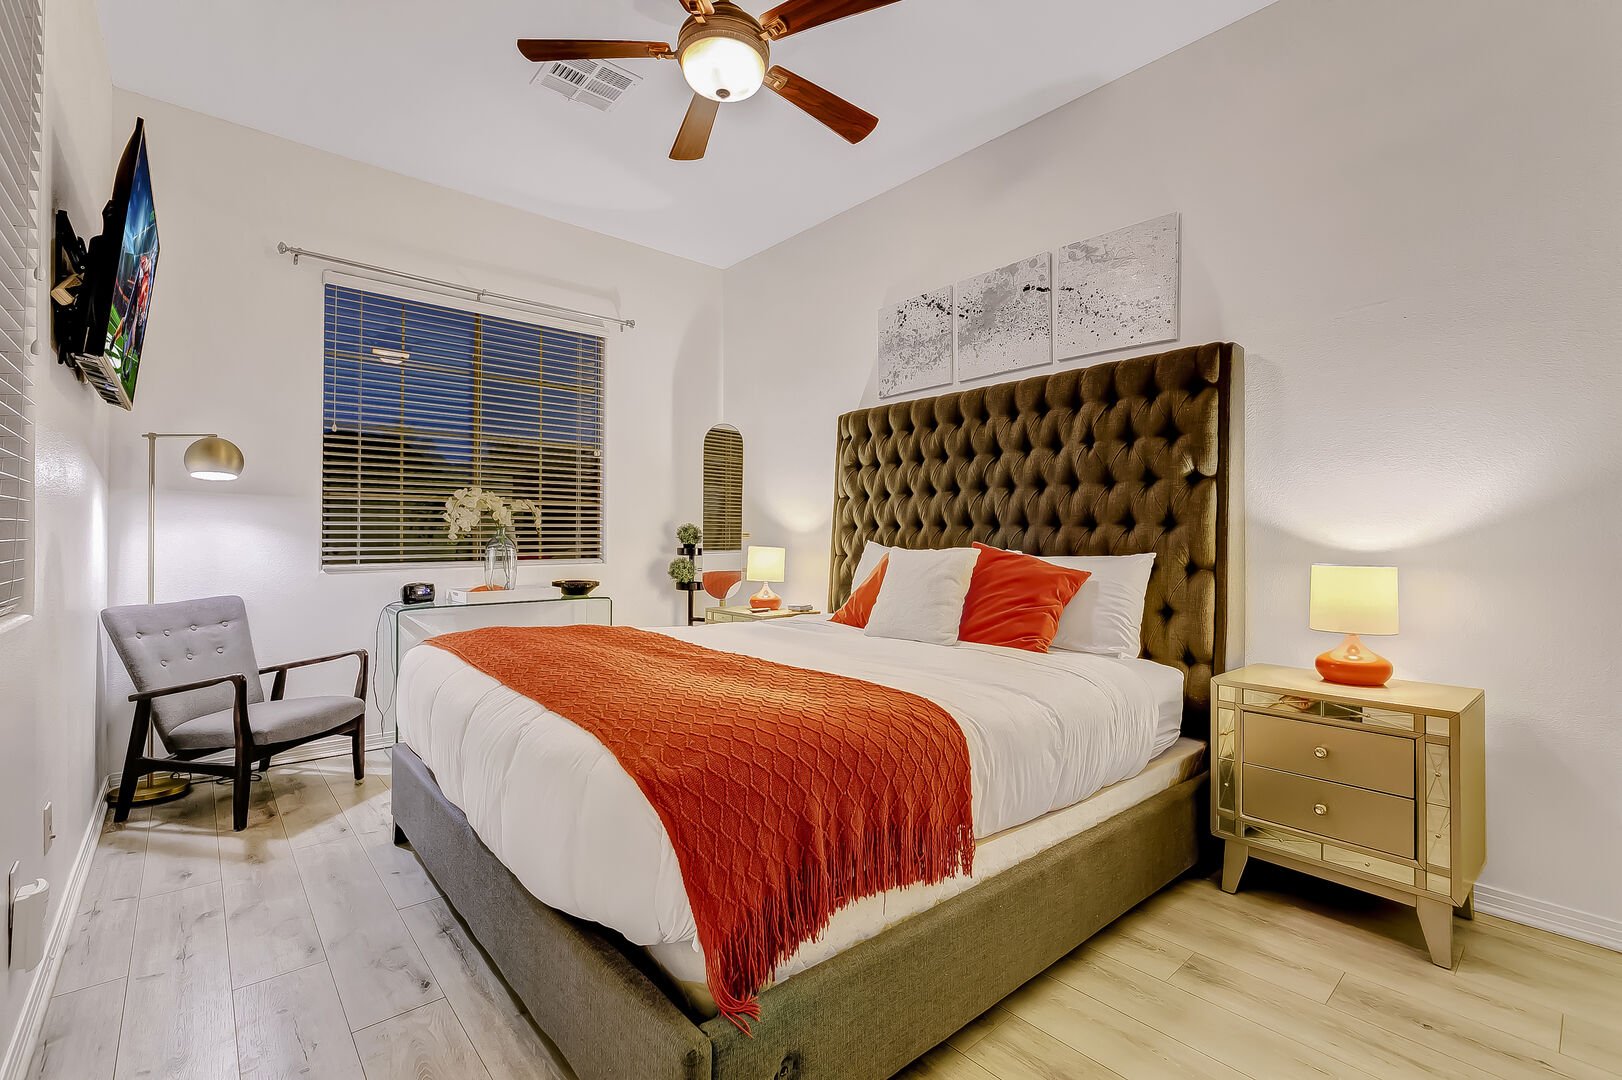 Casita Suite 3 features a King-sized Bed, HDTV, remote-controlled ceiling fan with adjustable speeds & dimmer lighting, and its own private entrance through the front courtyard.